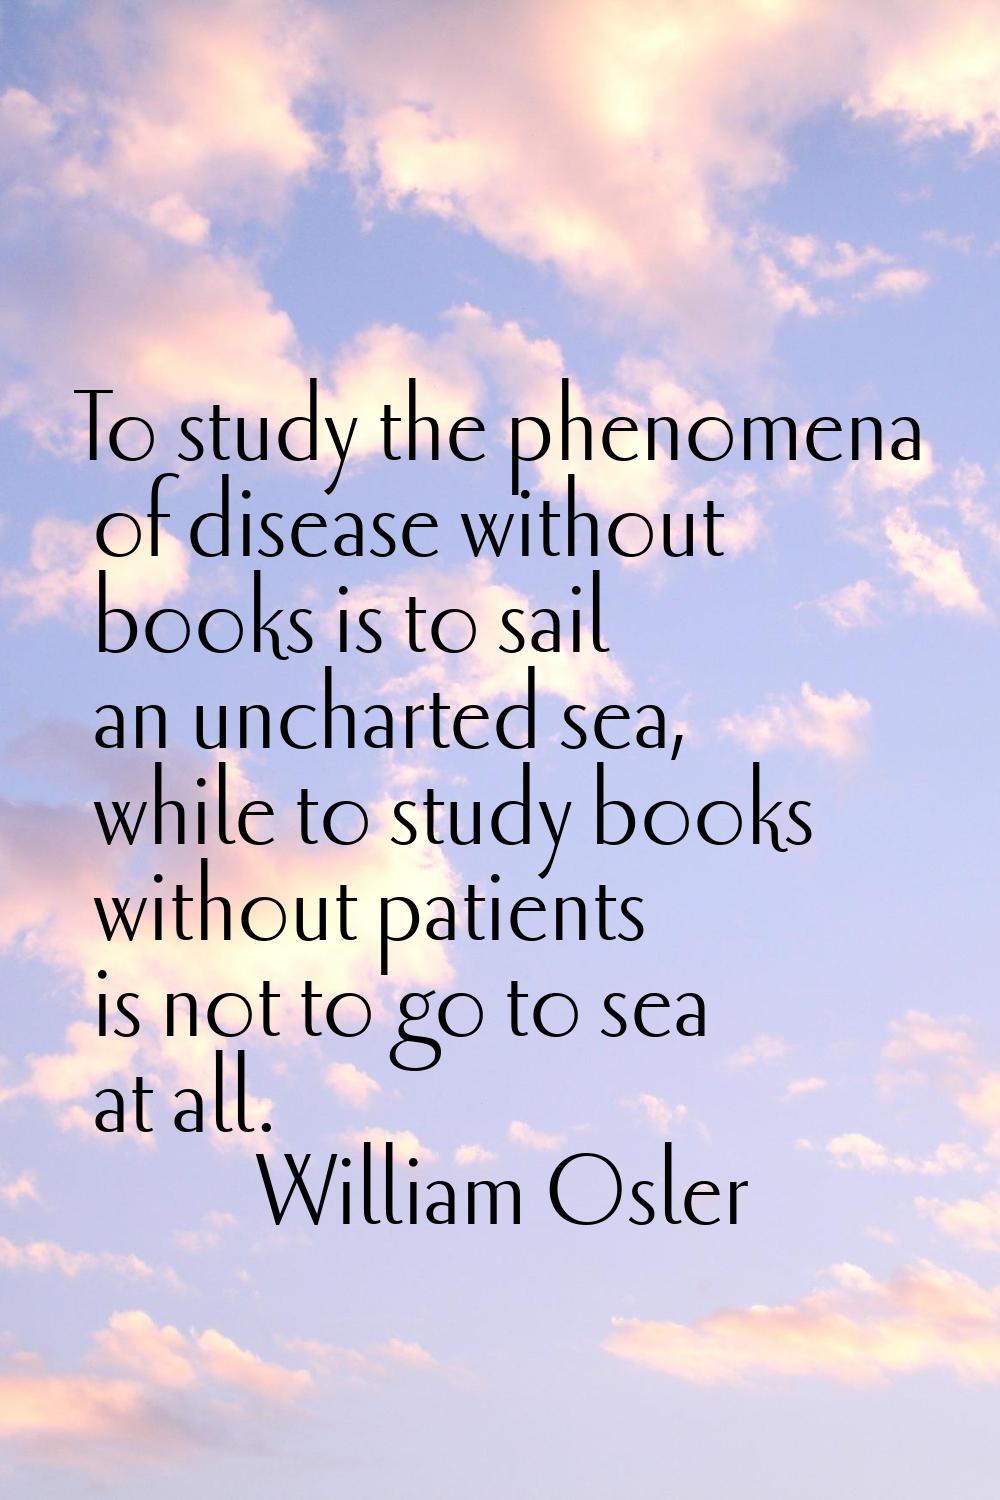 To study the phenomena of disease without books is to sail an uncharted sea, while to study books w